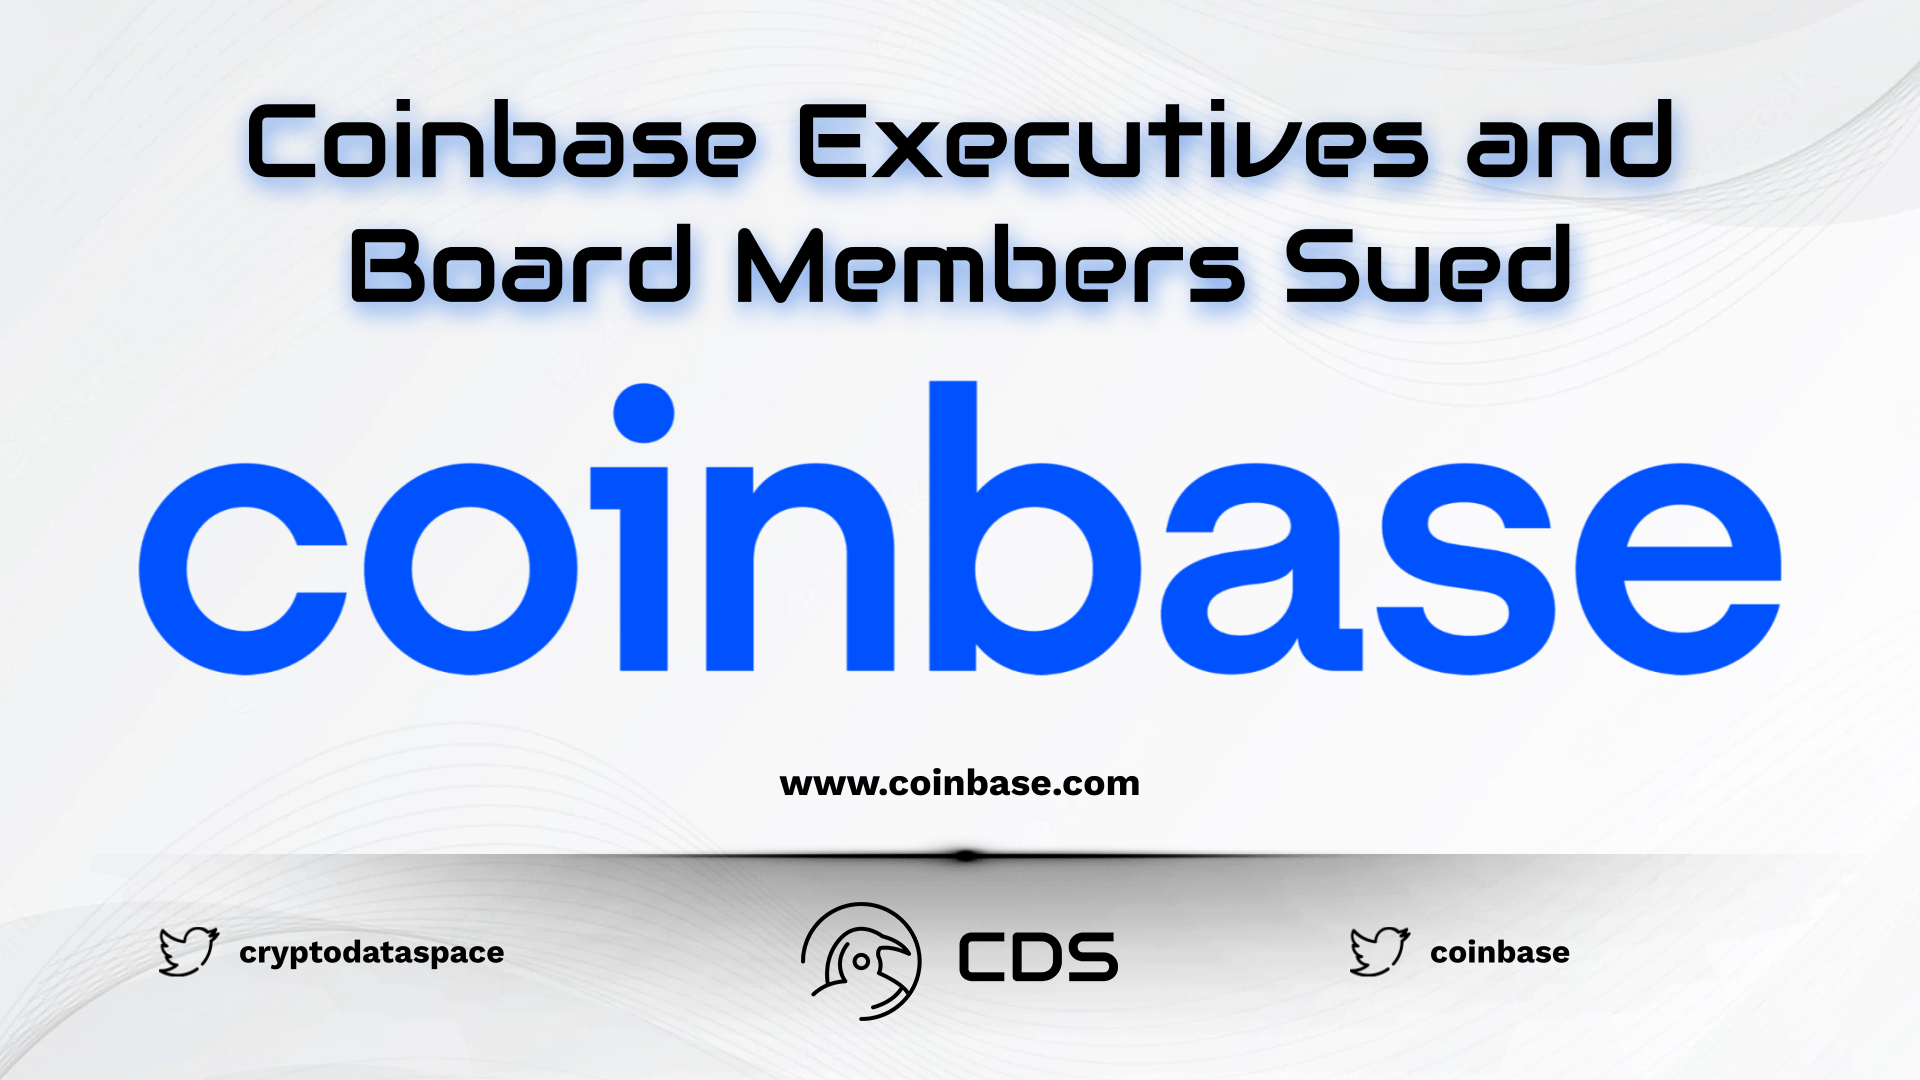 Coinbase Executives and Board Members Sued